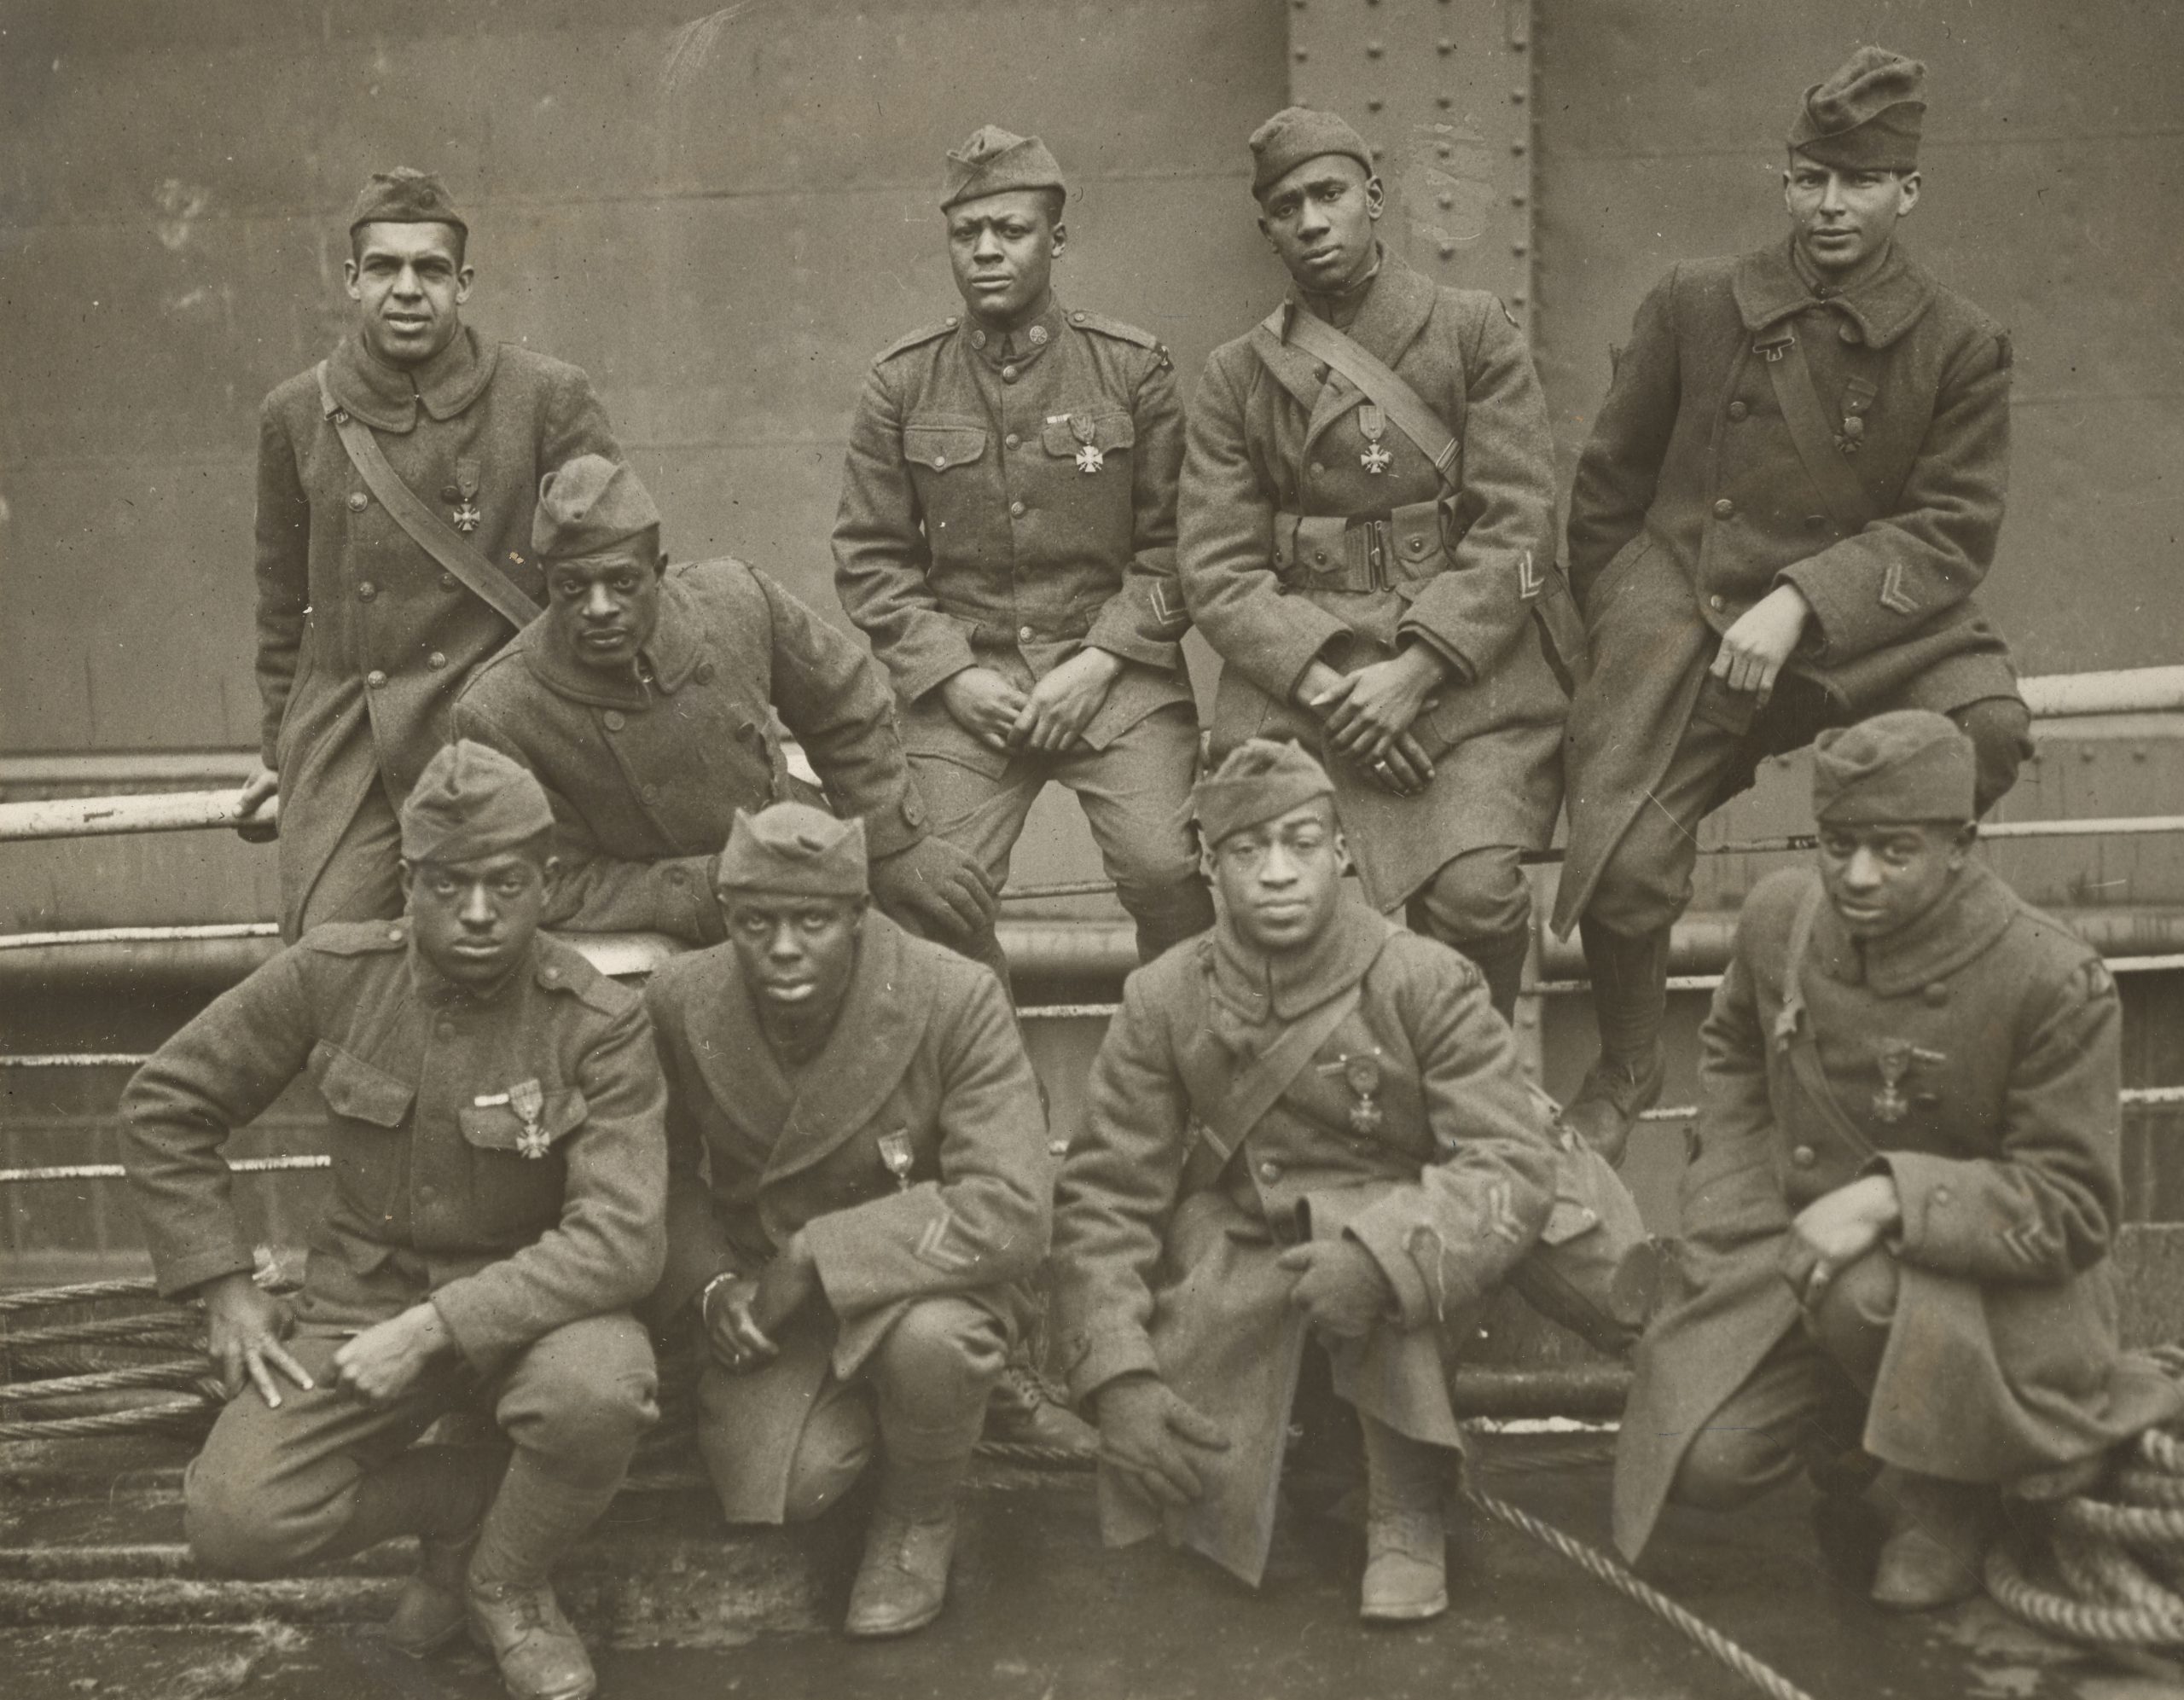 Nine members of the Harlem Hellfighters from WWI.